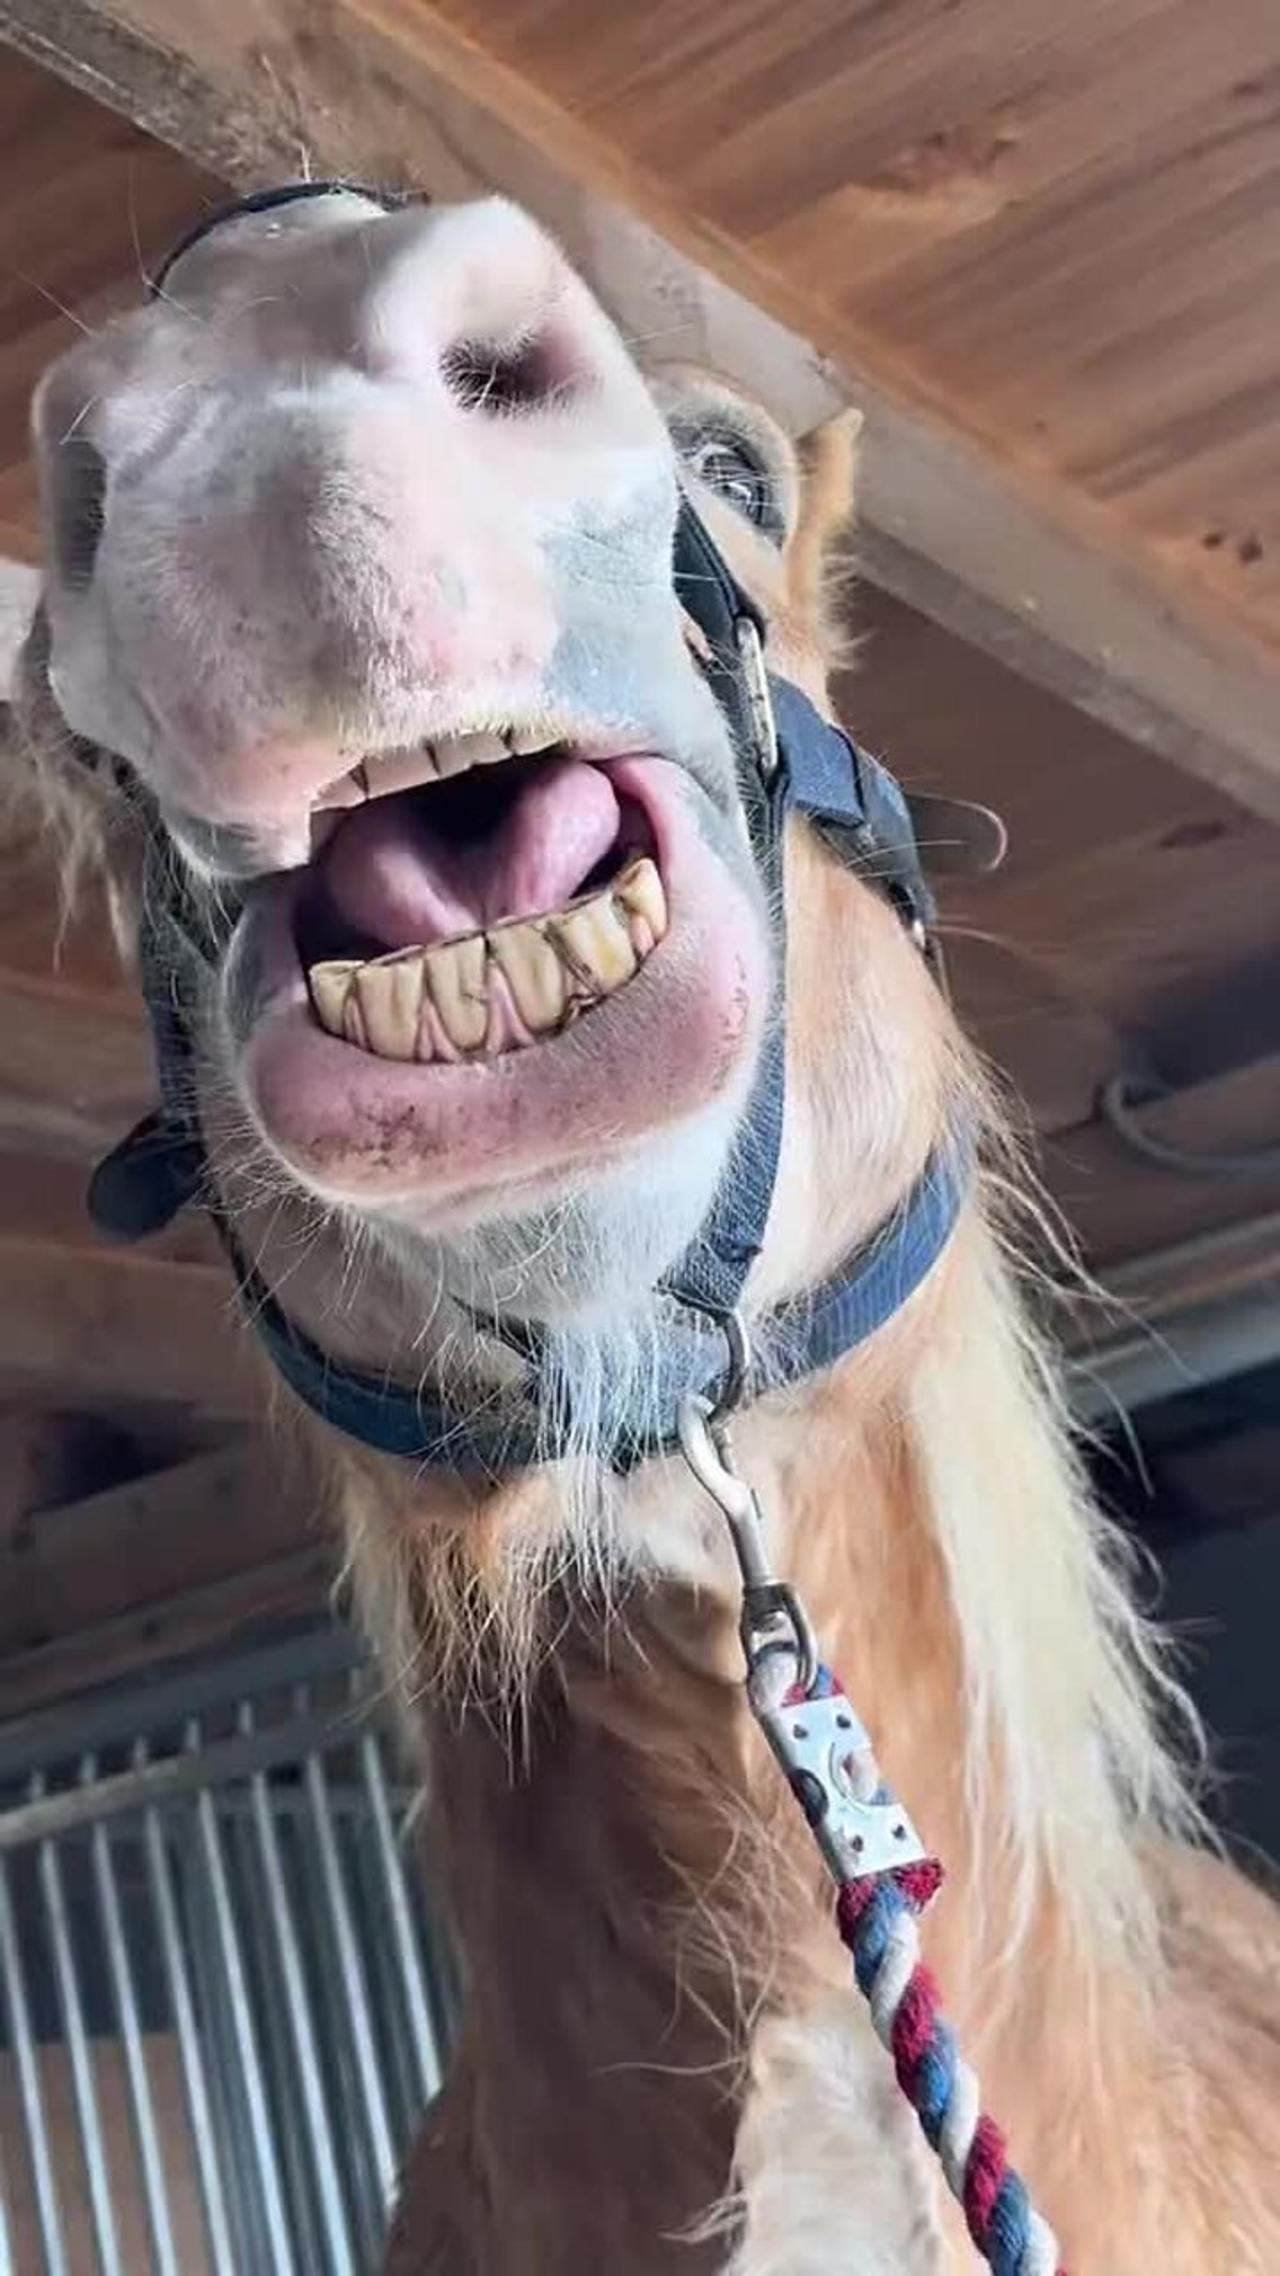 Rescued draft horse is loving some belly scratches!.mp4